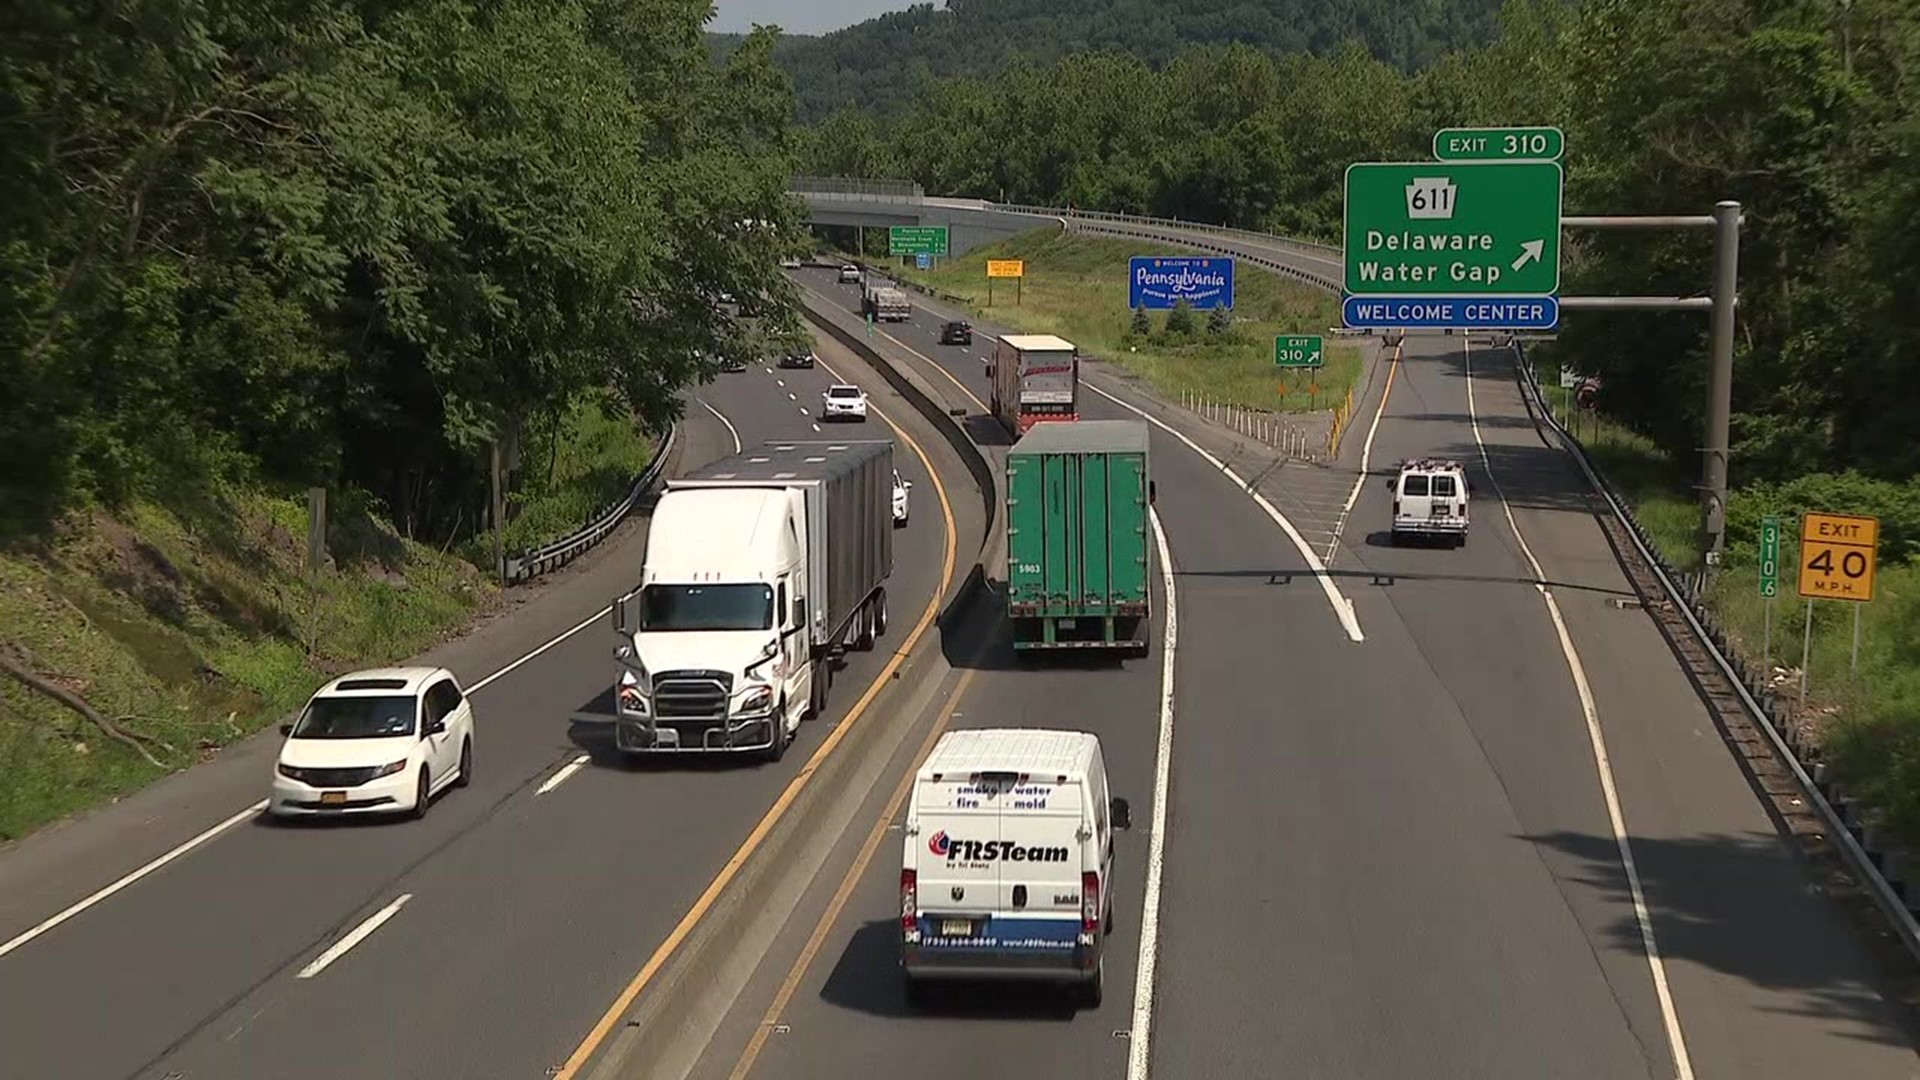 We found traffic moving smoothly Thursday afternoon on Interstate 80 near Delaware Water Gap.